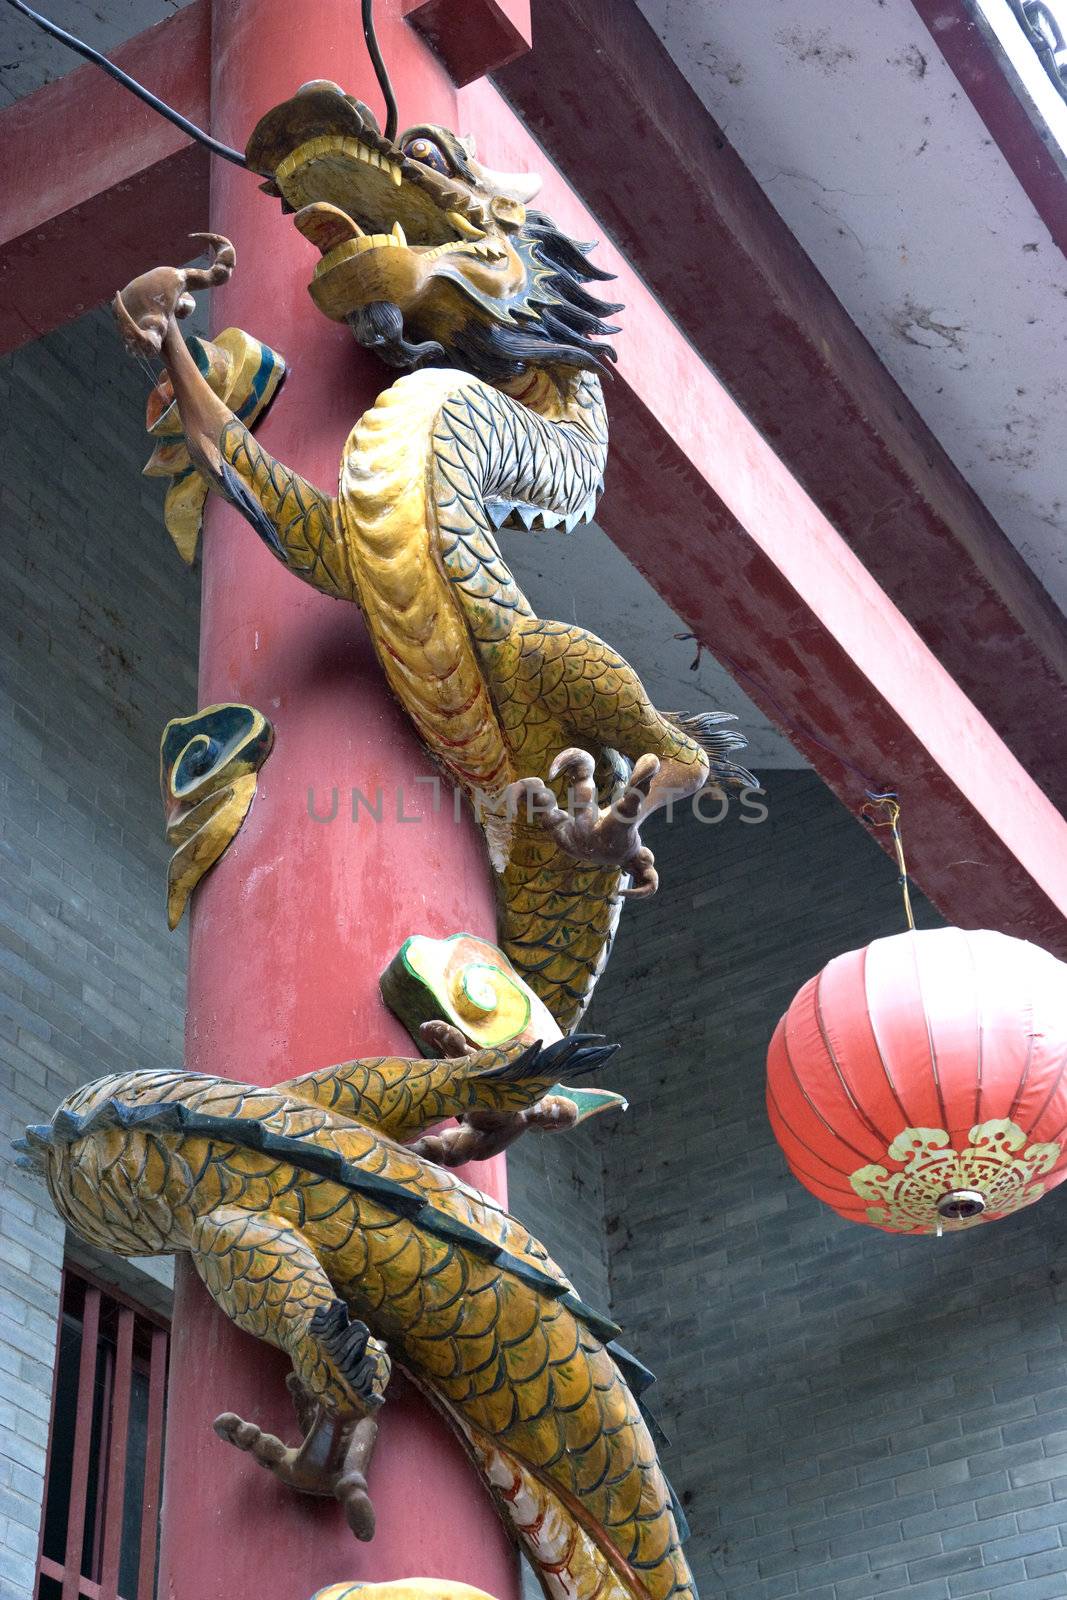 Image of a dragon carved on a pillar at the entrance of a temple that has been sealed closed apparently because it is haunted at Daxu Ancient Town, Guilin, China.